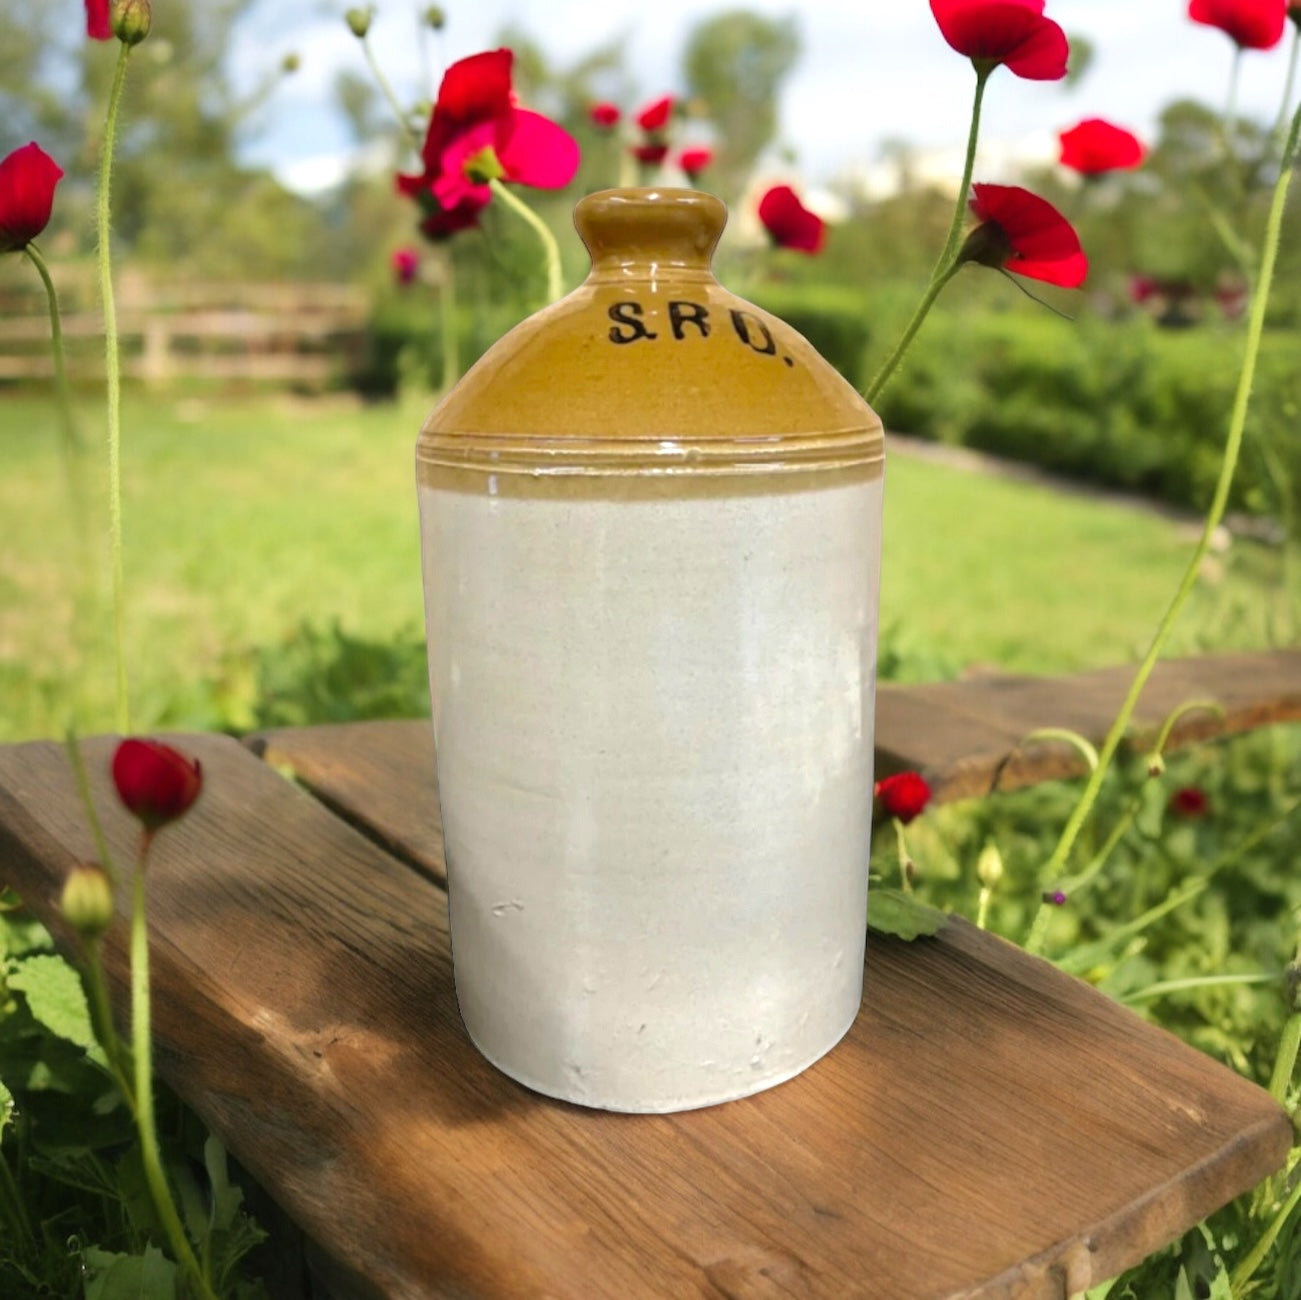 WW1 British militaria srd jar for sale from All Things French Store